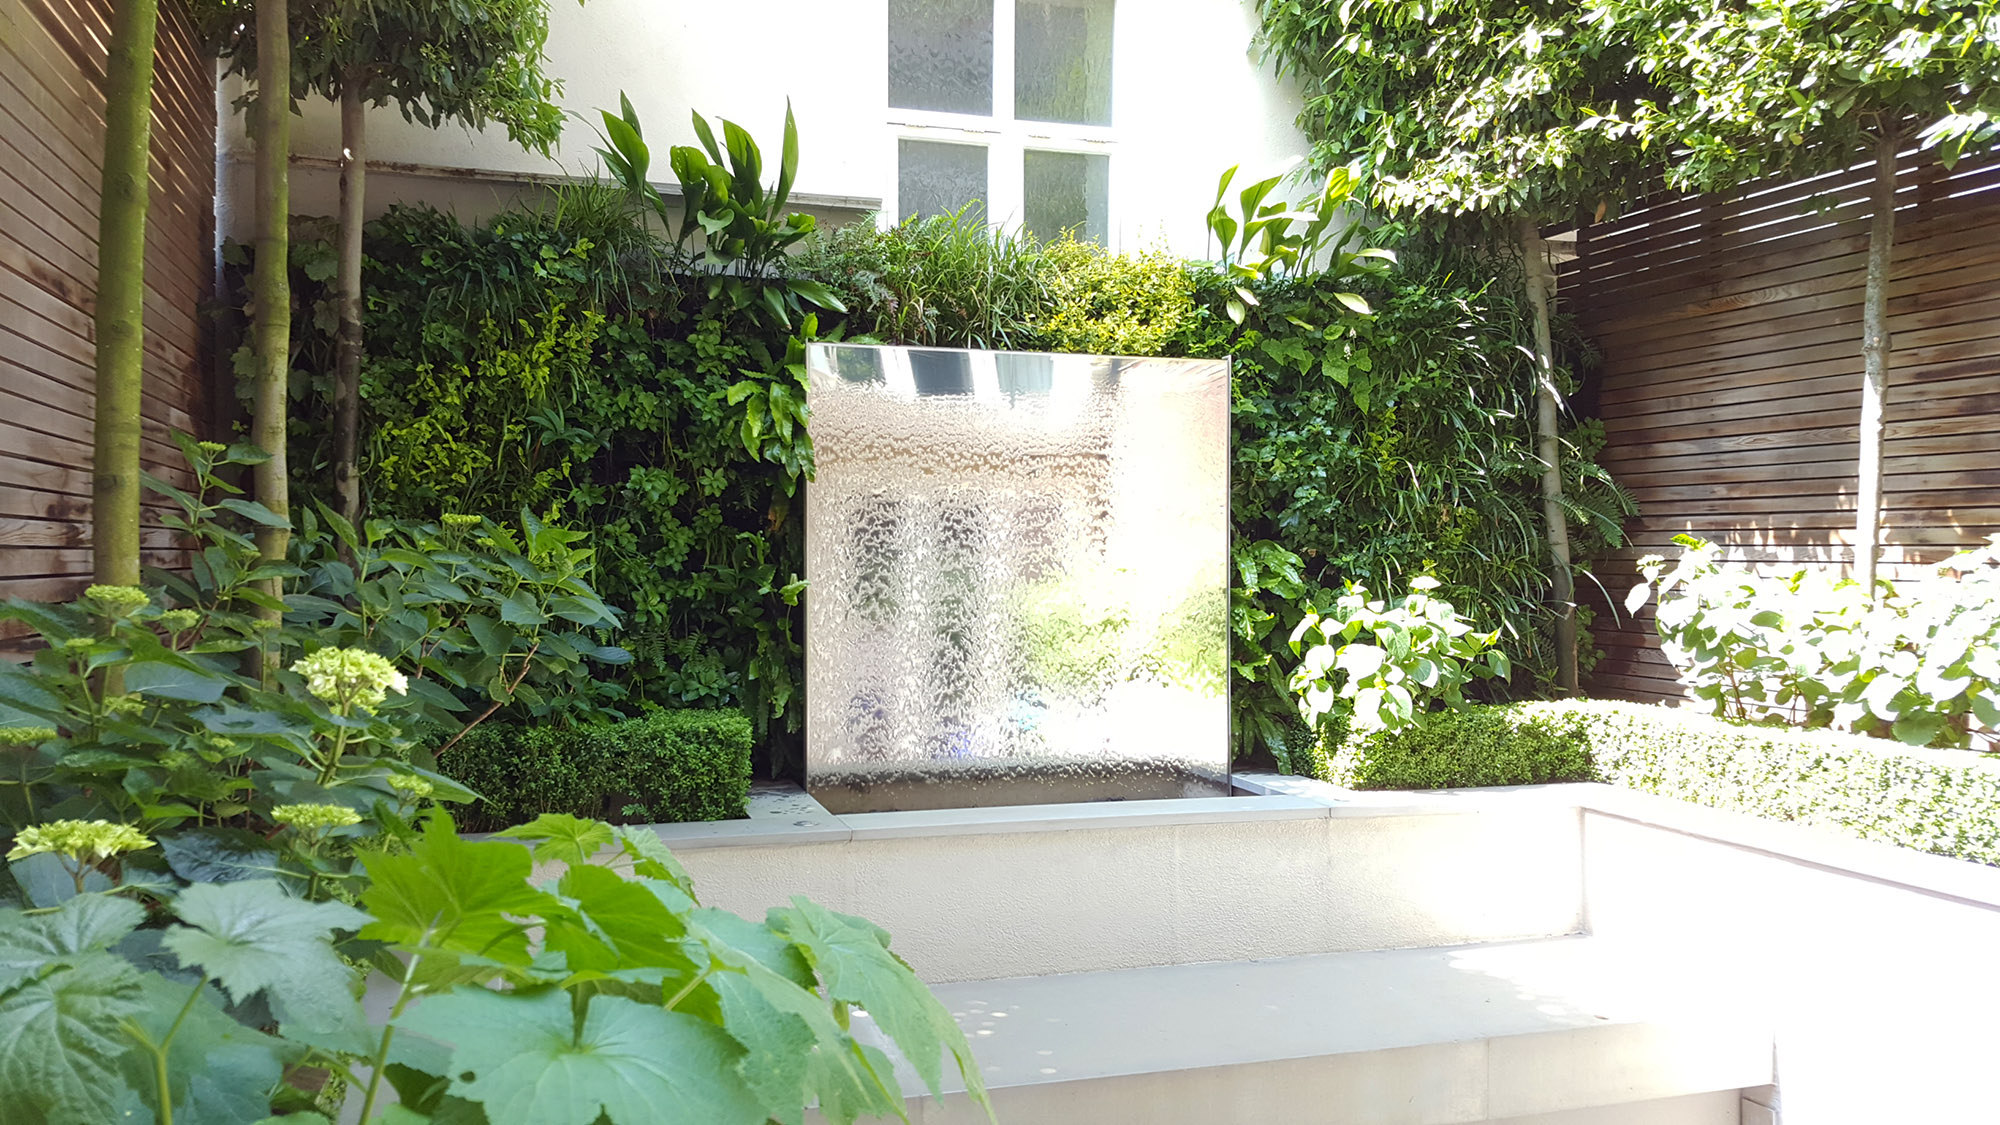 living wall and plants surrounding a mirror water feature in a private garden